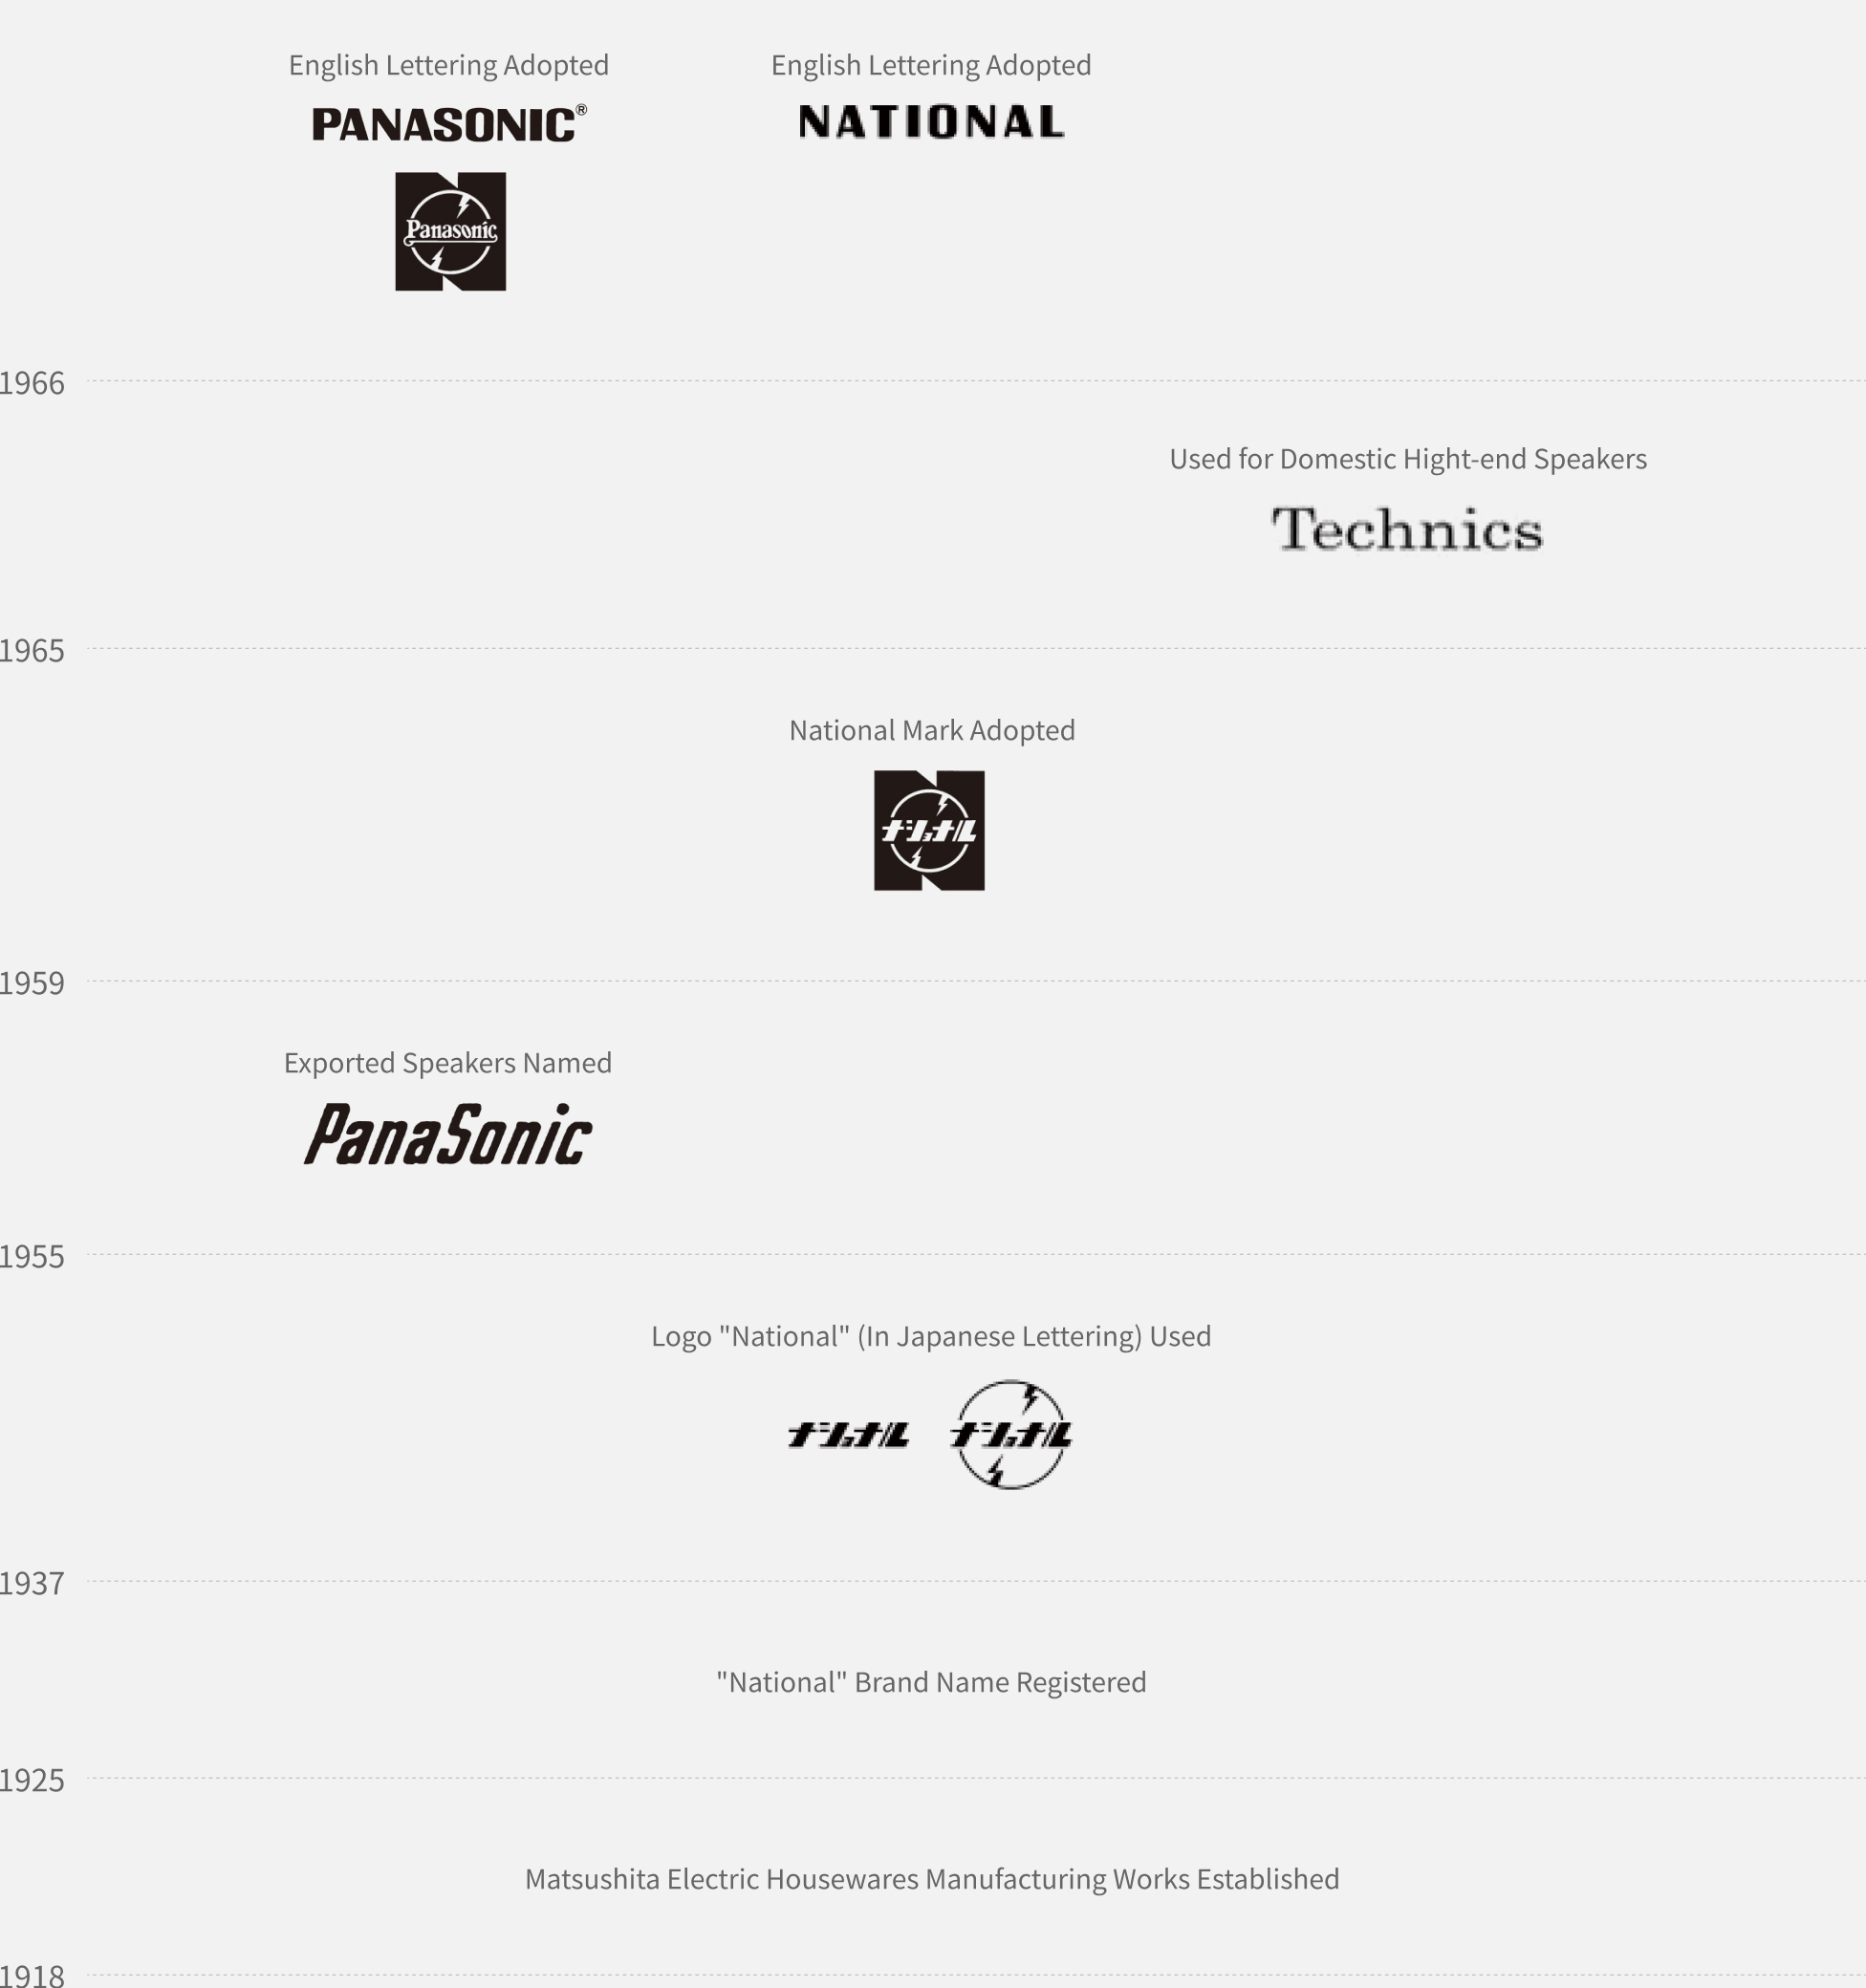 1966: New logo for "Panasonic" and "National" were adopted. 1965: Technics brand was adopted for high-end speakers for the Japanese market. 1959: The "N-Mark" was adopted for the National brand. 1955: The "Panasonic" was adopted for speakers for foreign markets. 1937: The "Natio-letters" logo adopted for the National brand. 1925: The original "National" trademark was registered. 1918: Matsushita Electric Manufacturing Works was founded.